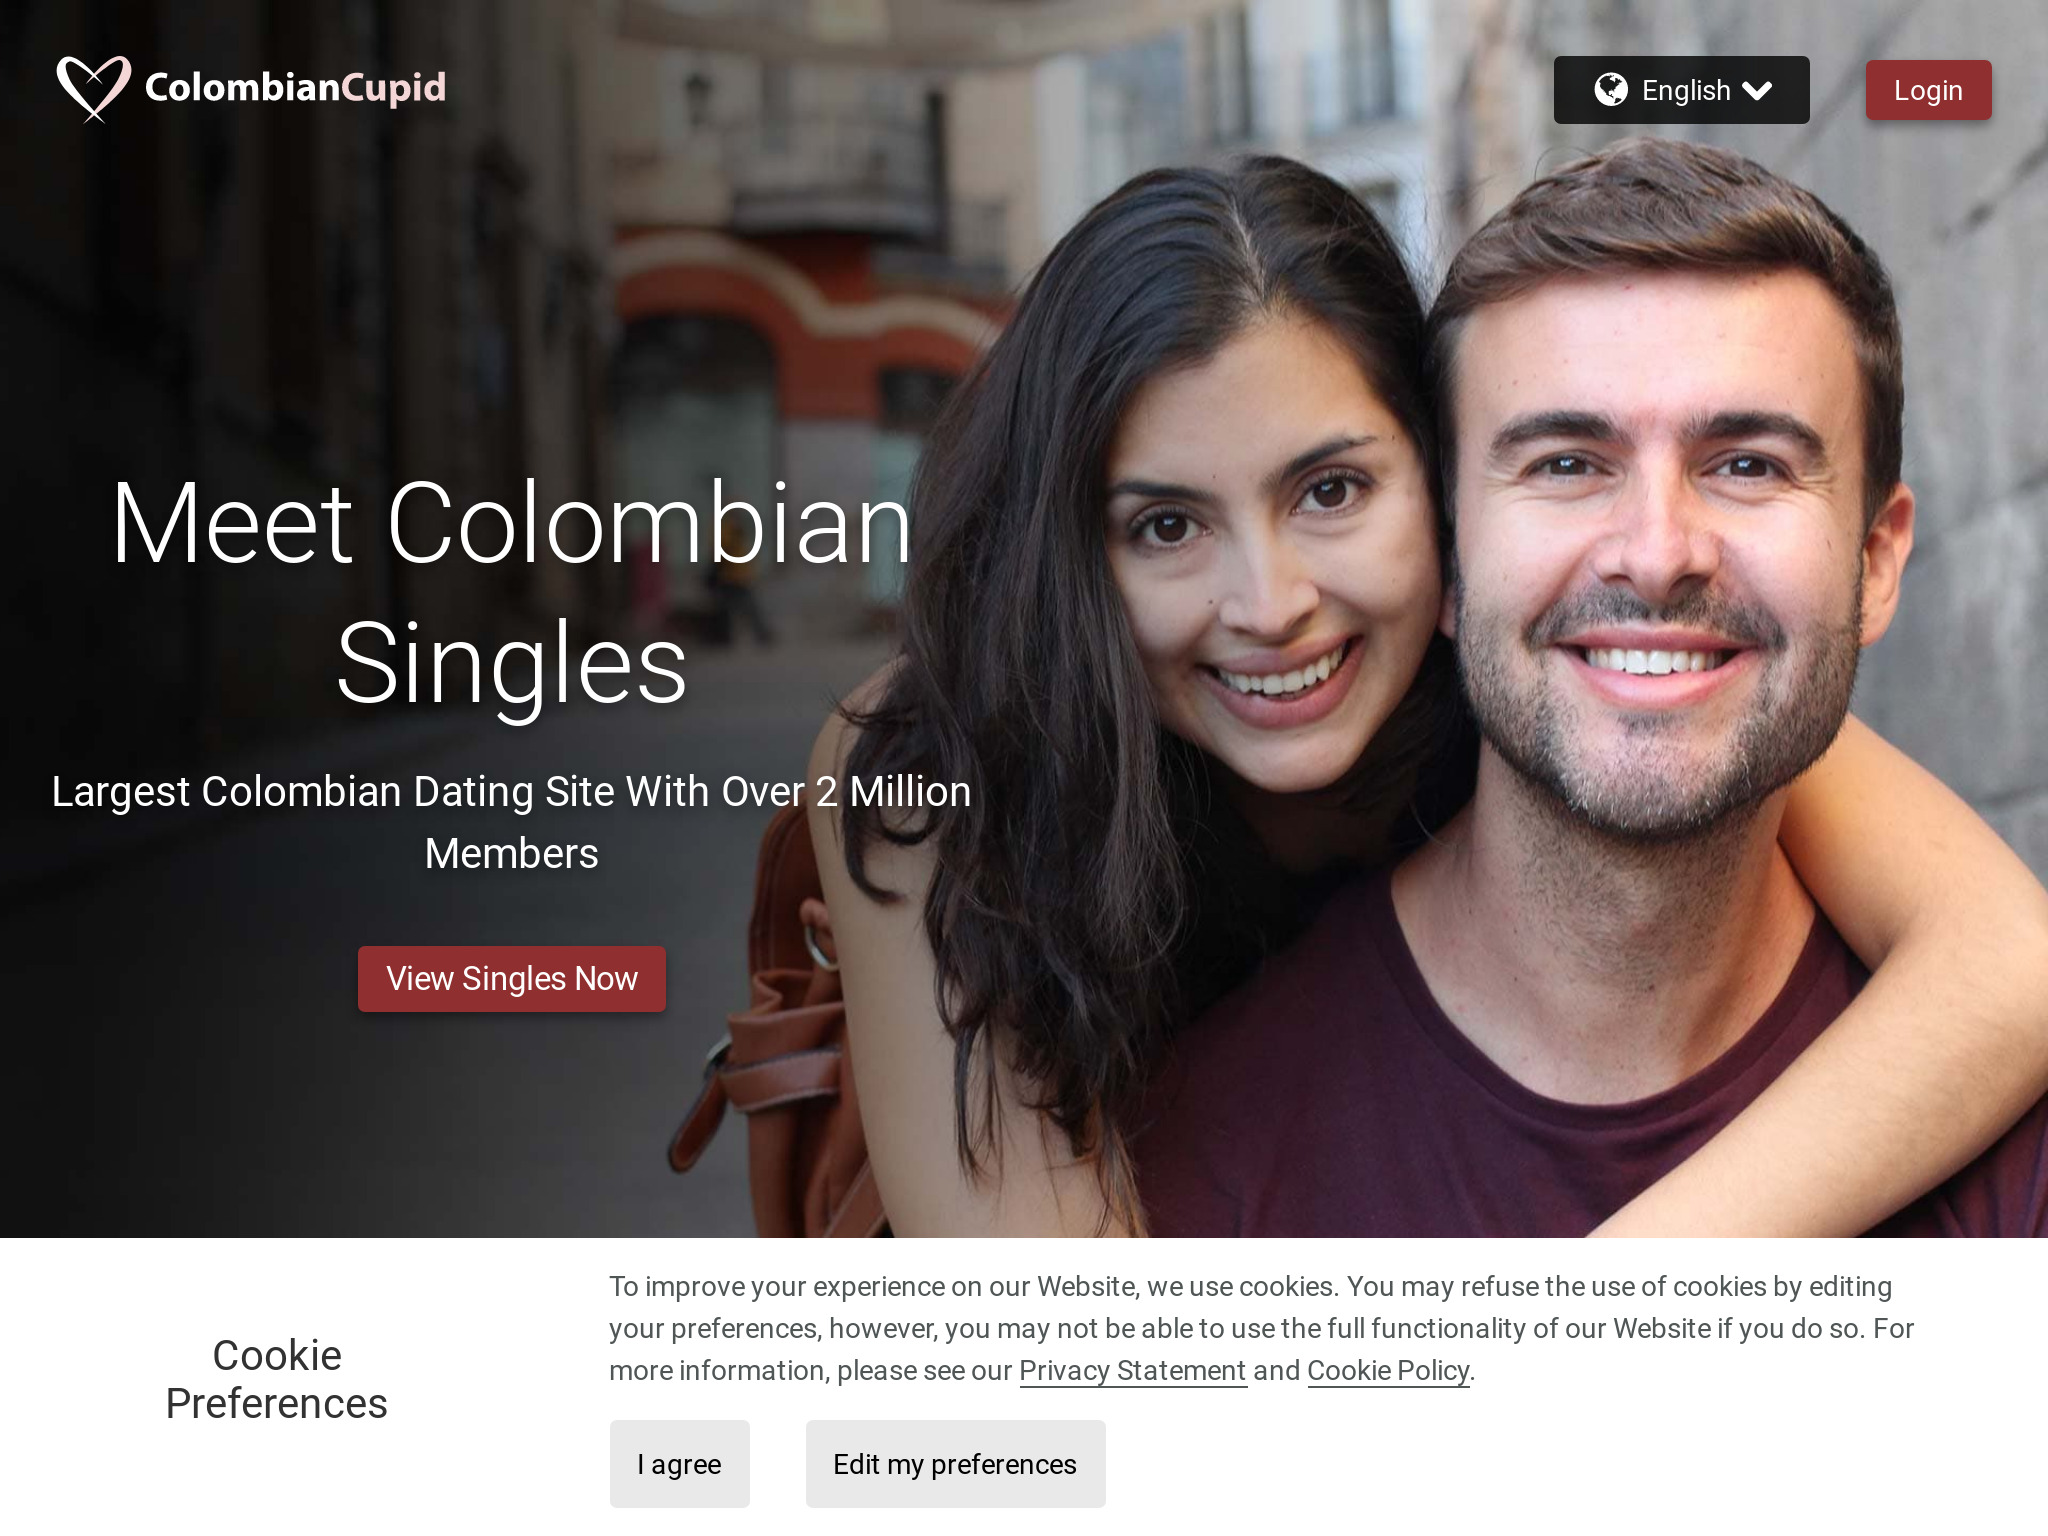 ColombianCupid Review: Does It Deliver What It Promises?